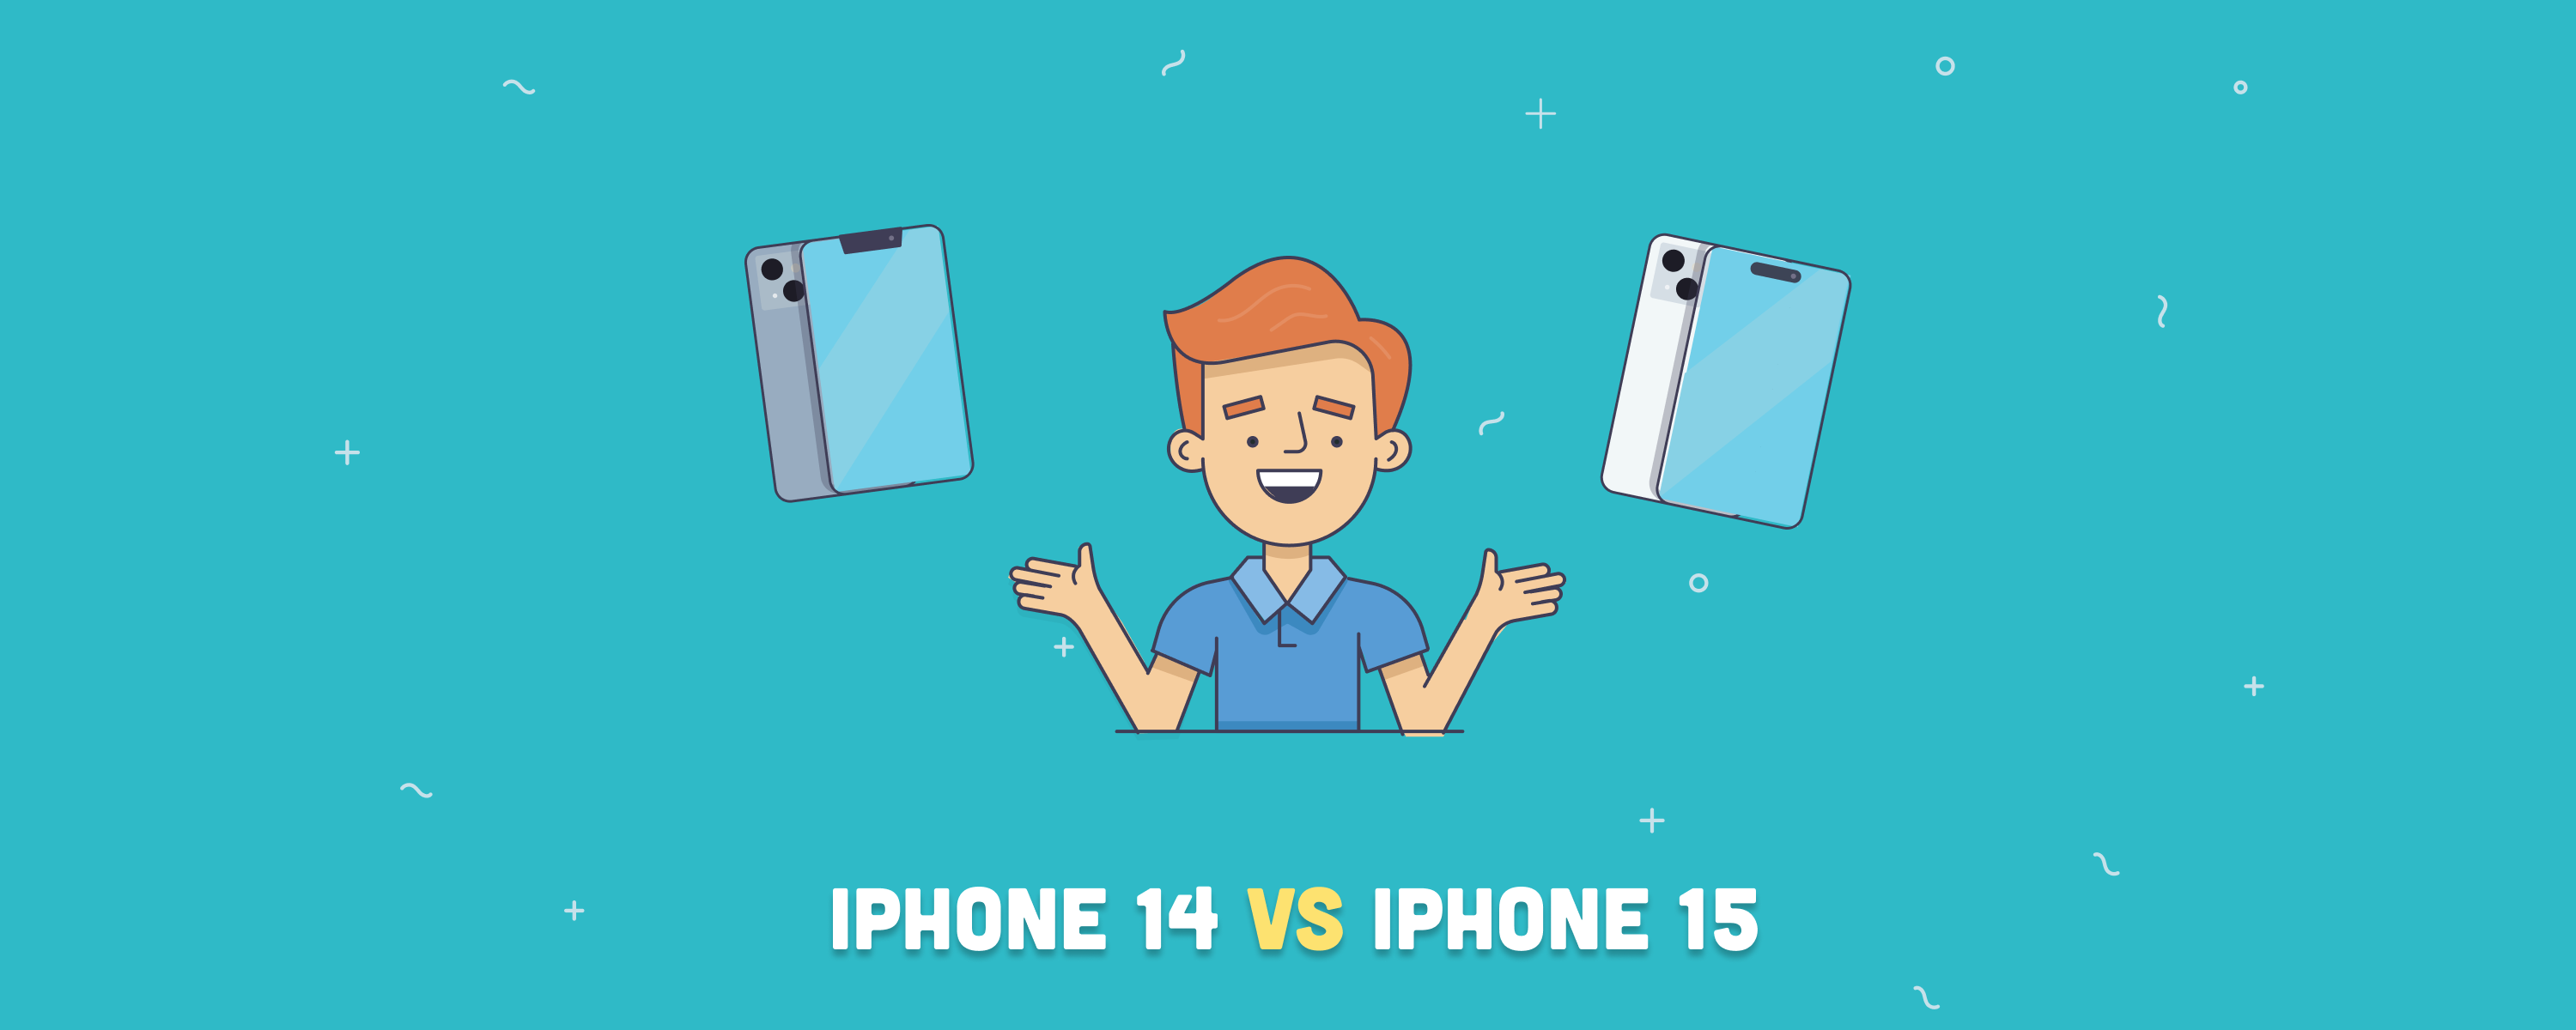 iPhone 14 vs. iPhone 15: Which One Should You Get?